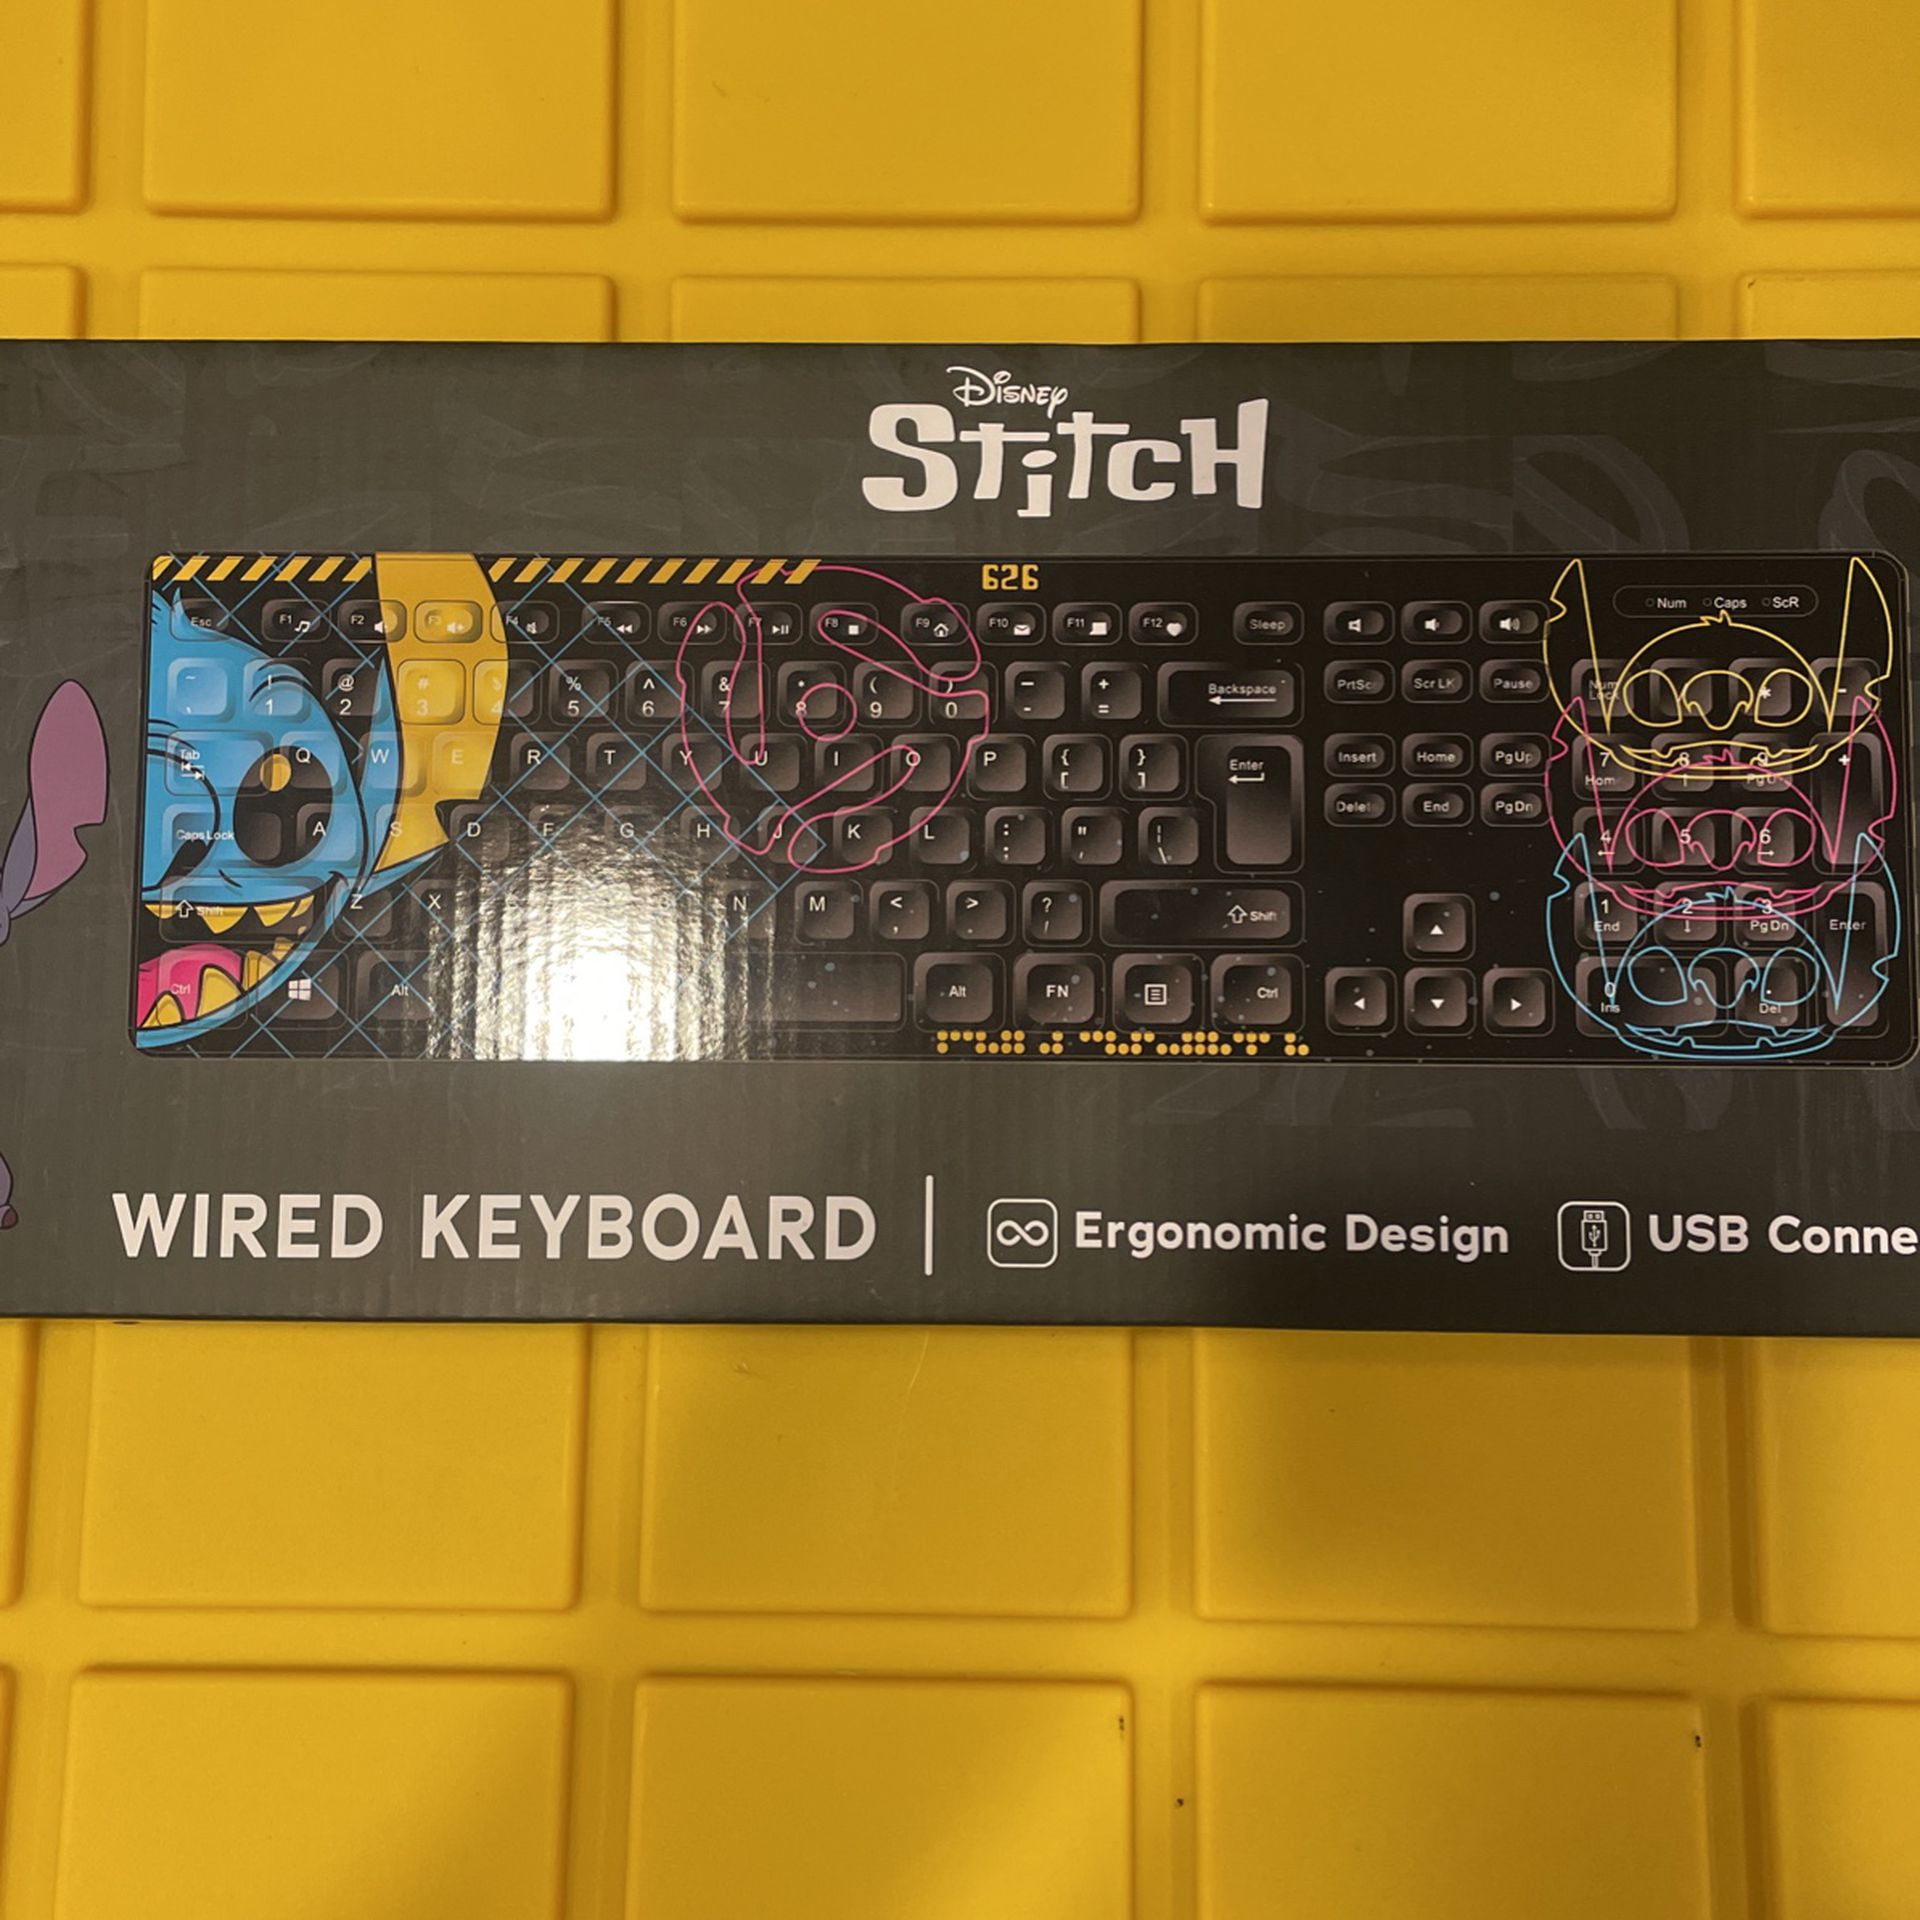 Rare Culturefly Disney Stitch Wired Keyboard - Limited Edition Collectible $18